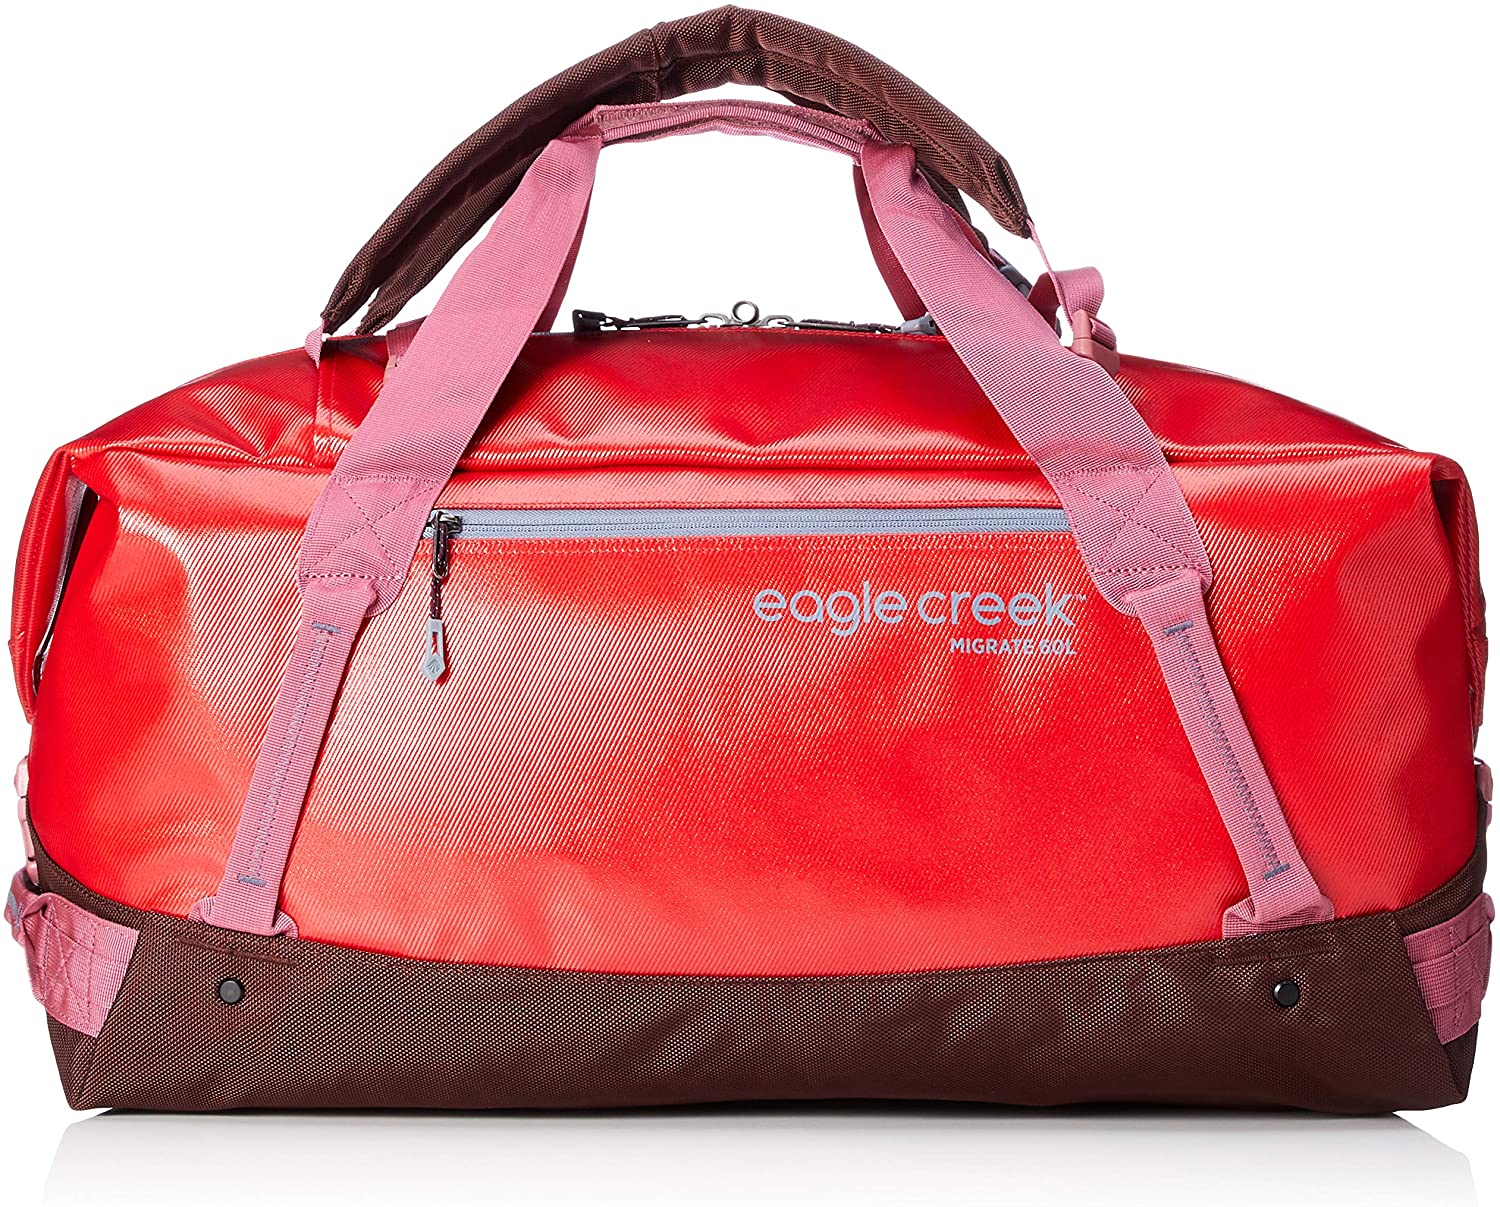 Eagle Creek Migrate Duffel 60L in Coral Sunset color from the front